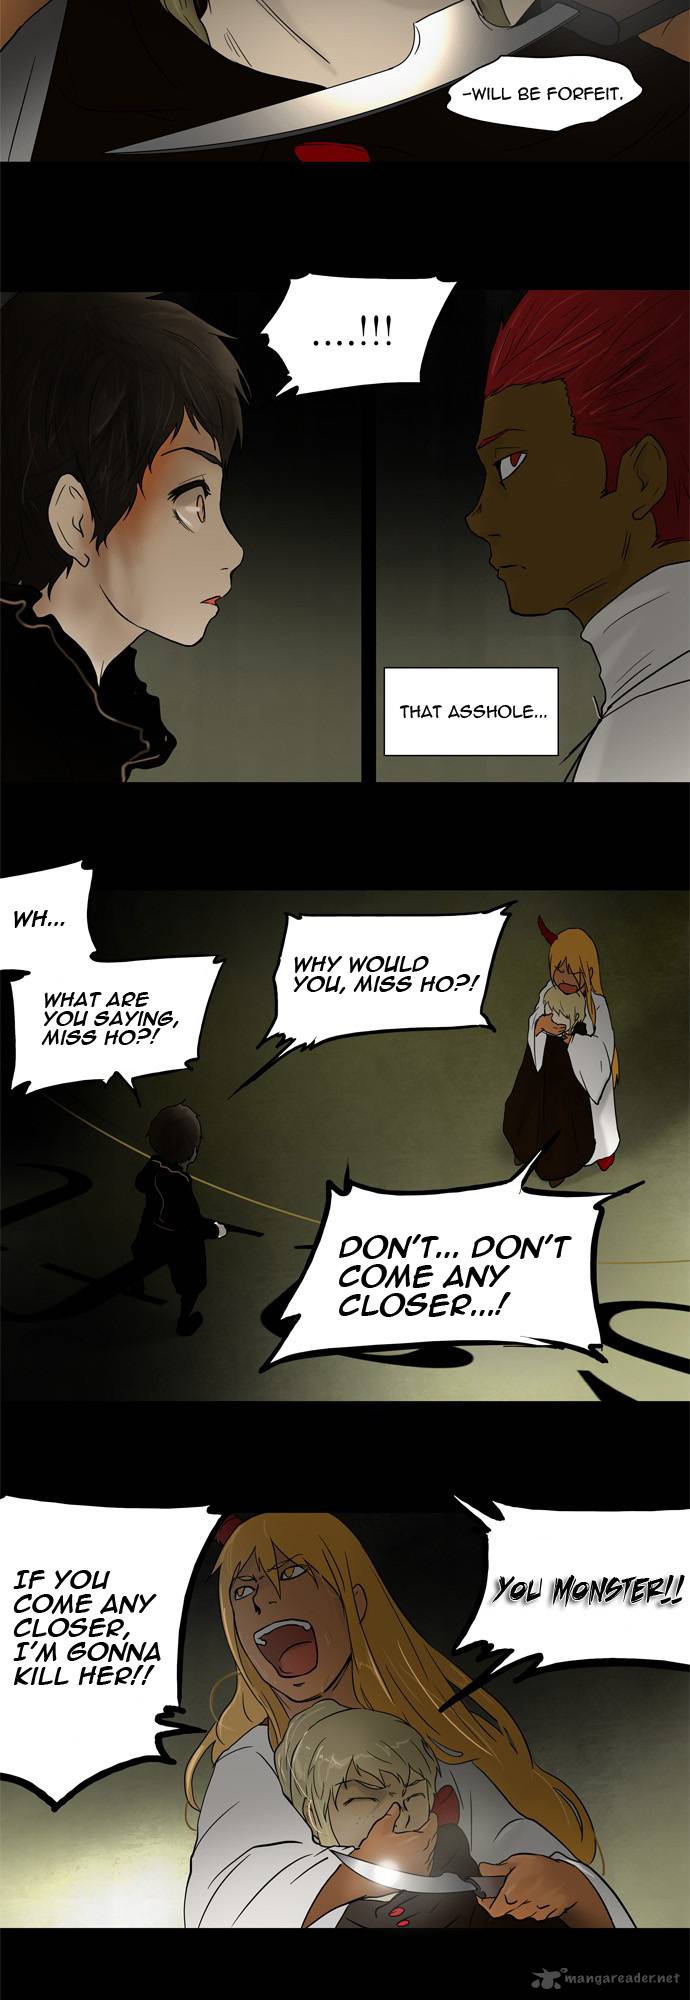 Tower Of God 48 32